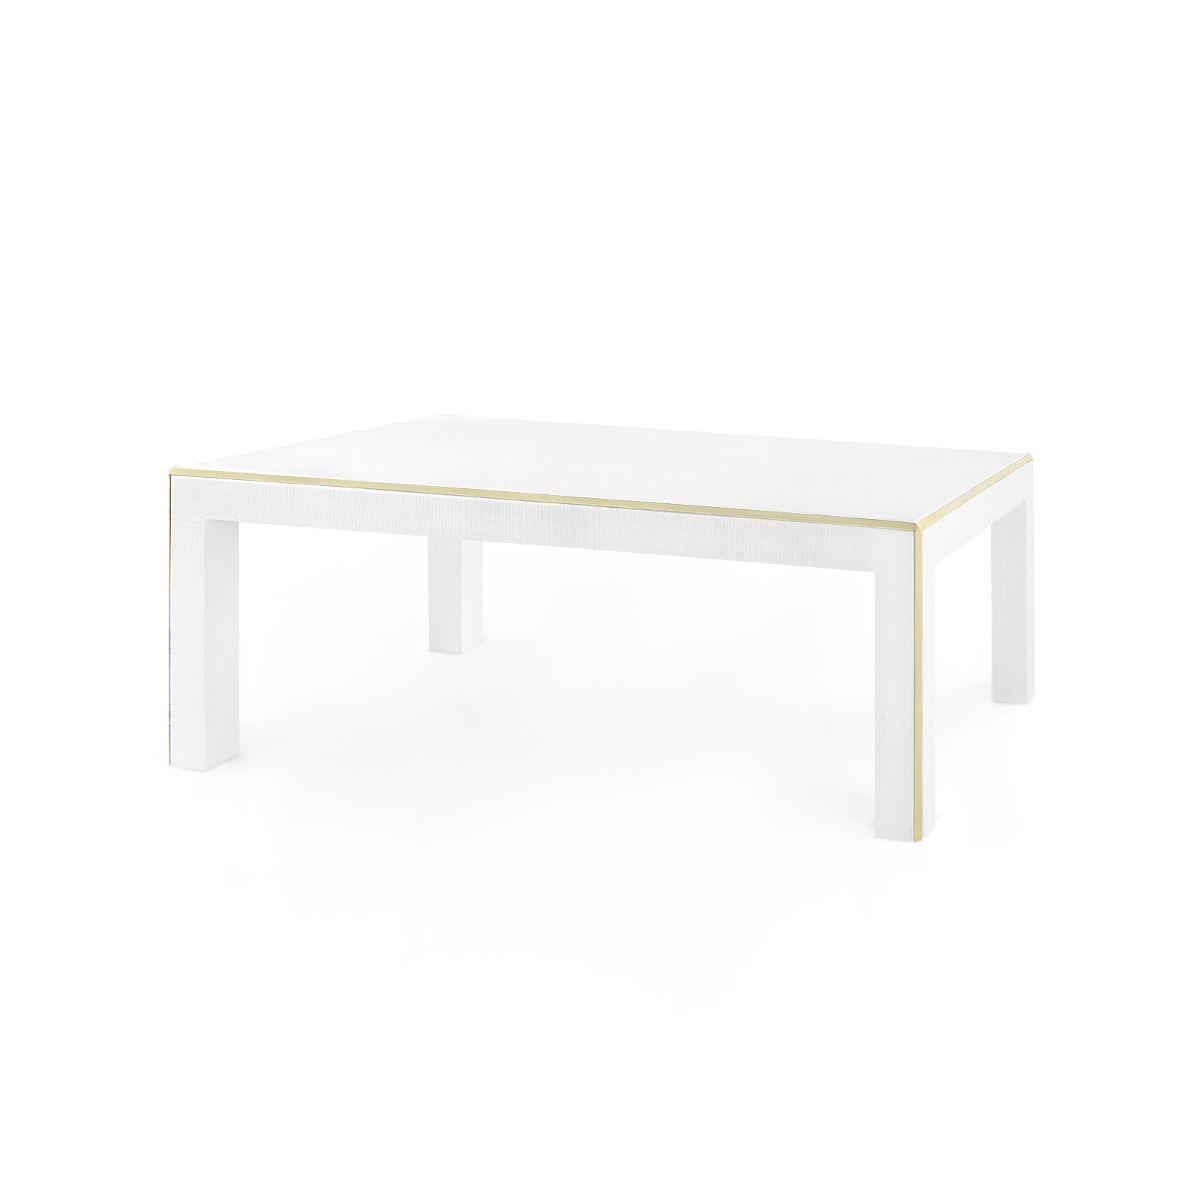 Load image into Gallery viewer, Lauren Coffee Table WhiteTable Bungalow 5  White   Four Hands, Burke Decor, Mid Century Modern Furniture, Old Bones Furniture Company, Old Bones Co, Modern Mid Century, Designer Furniture, https://www.oldbonesco.com/
